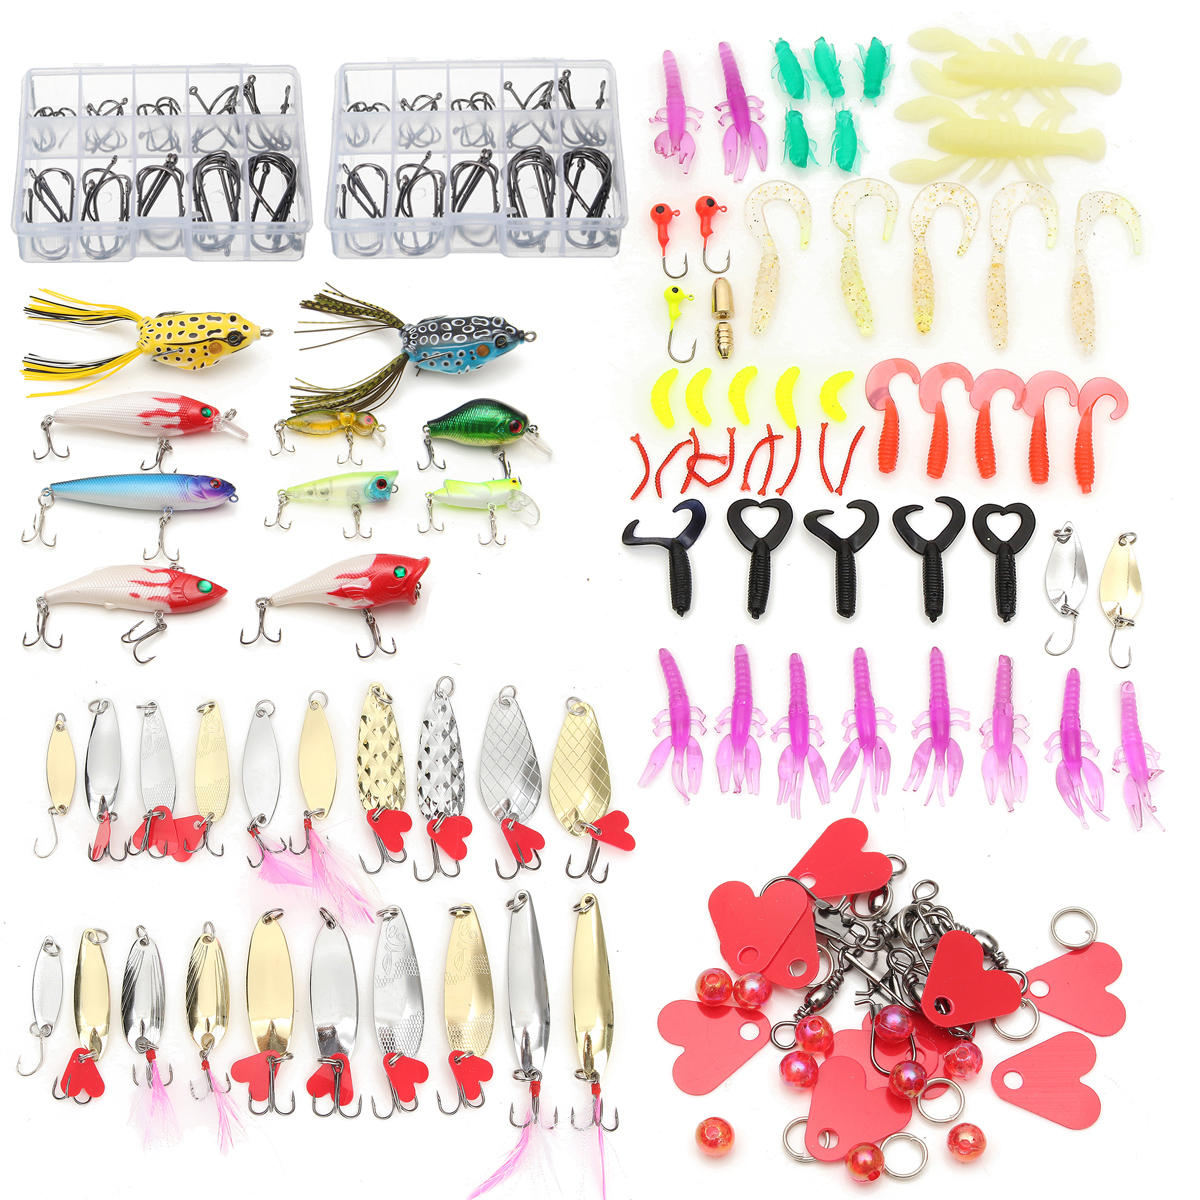 ZANLURE 226 Pcs Fishing Lure Frogs Pike Trout Parva Hook Kit Spinners Baits With Box